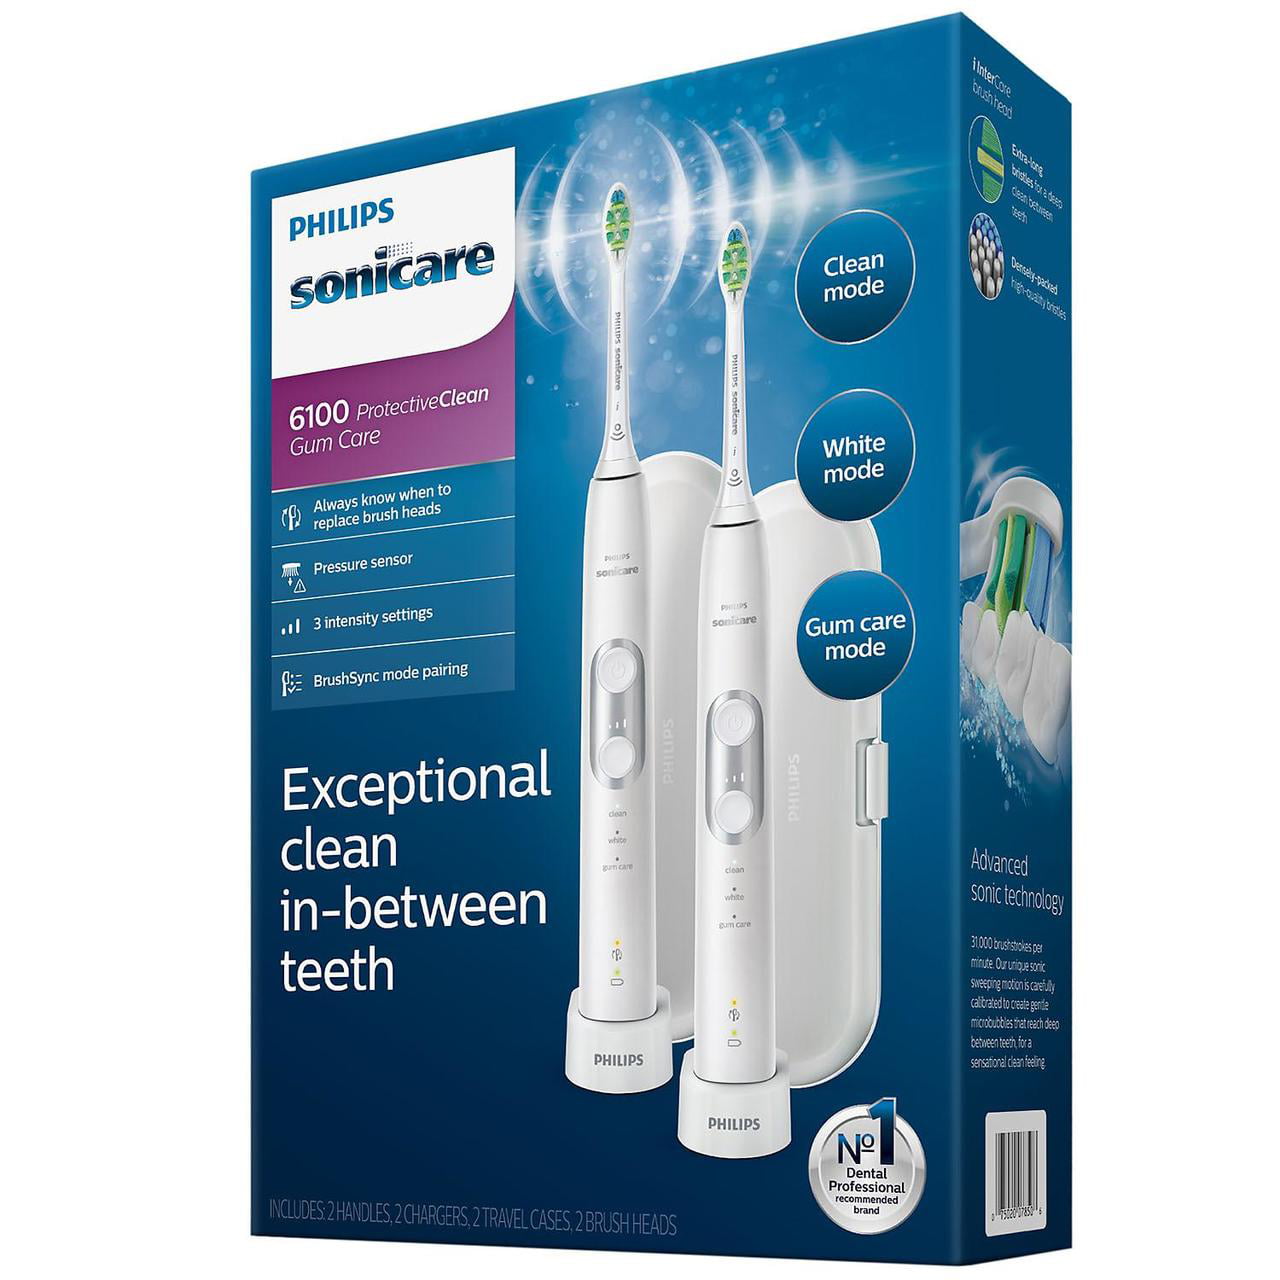 Philips Sonicare ProtectiveClean 6100 Gum Care Electric